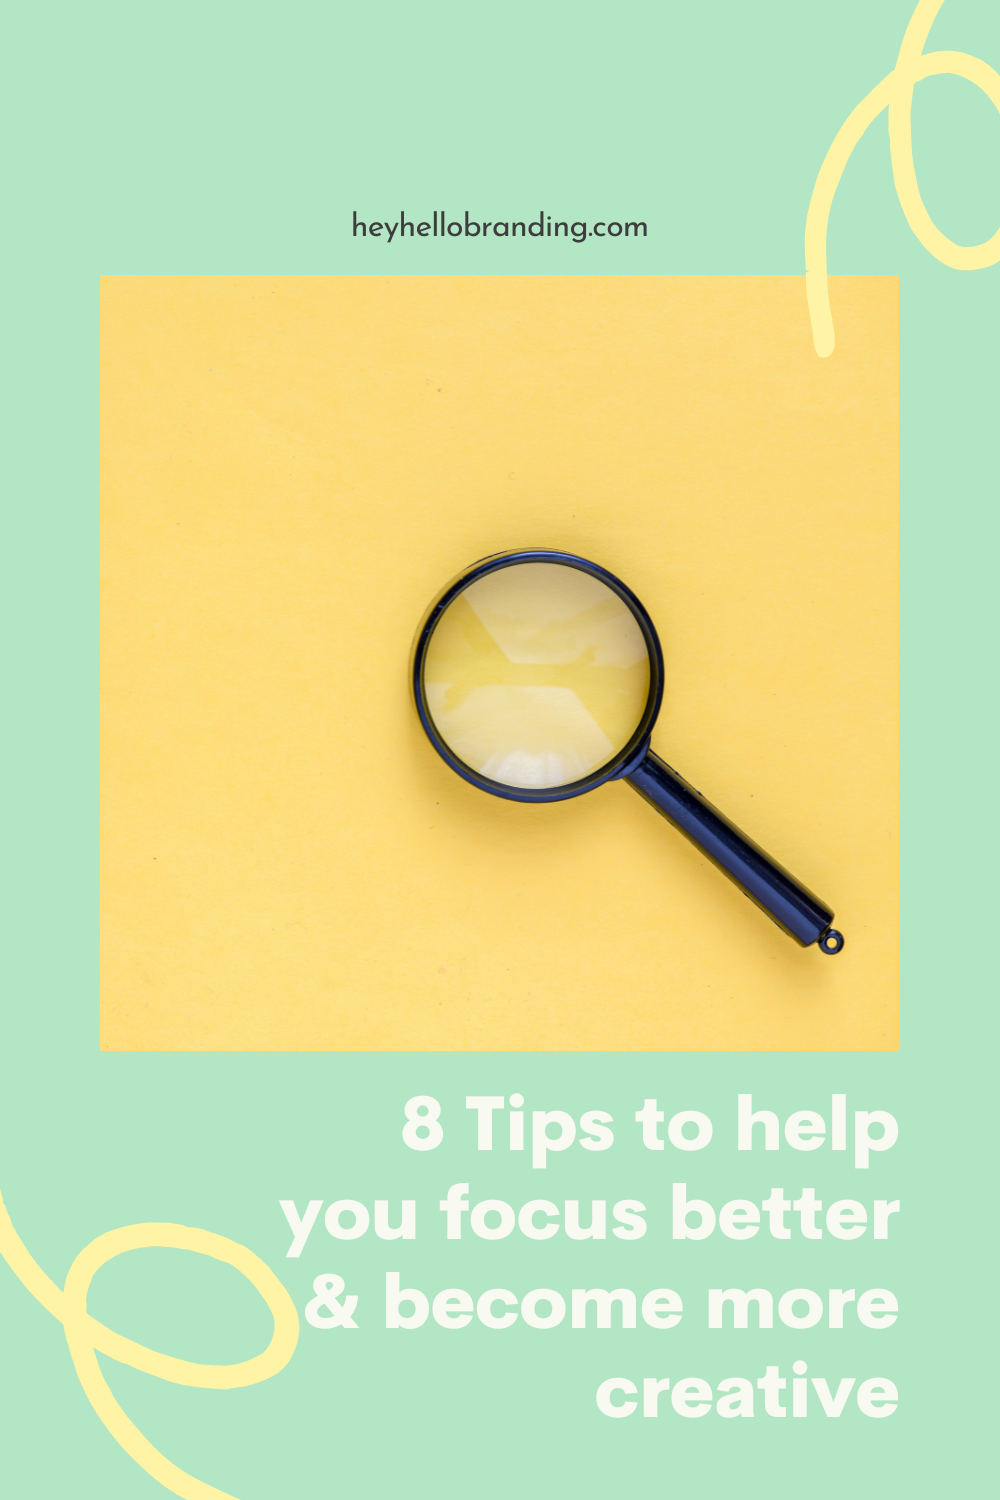 8 Tips to help you focus better & become more creative